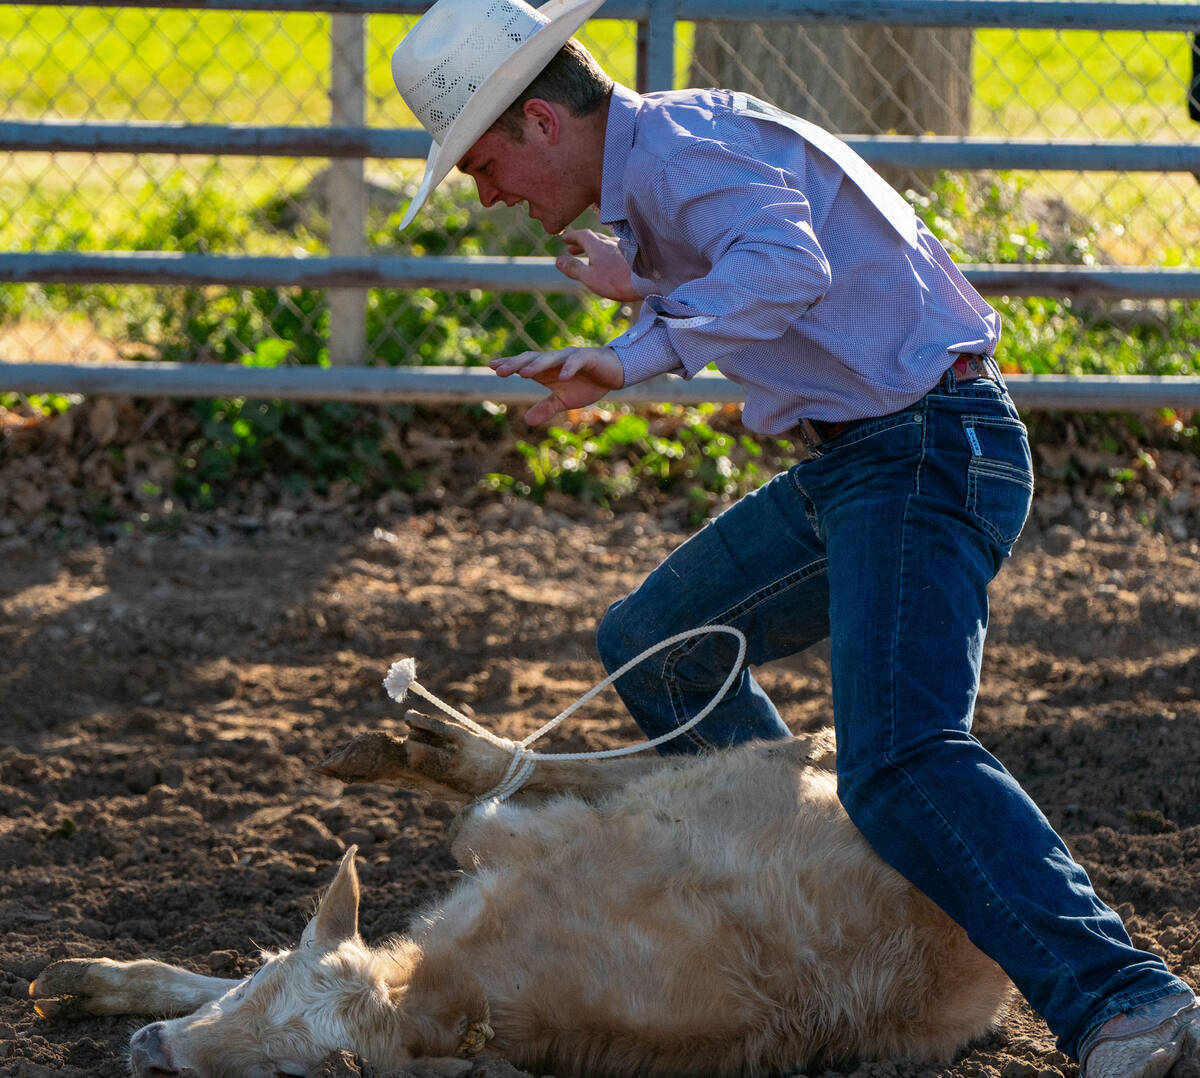 A calf is being tied up by a man on the ground at the Pahrump Junior High and High School Rodeo ...